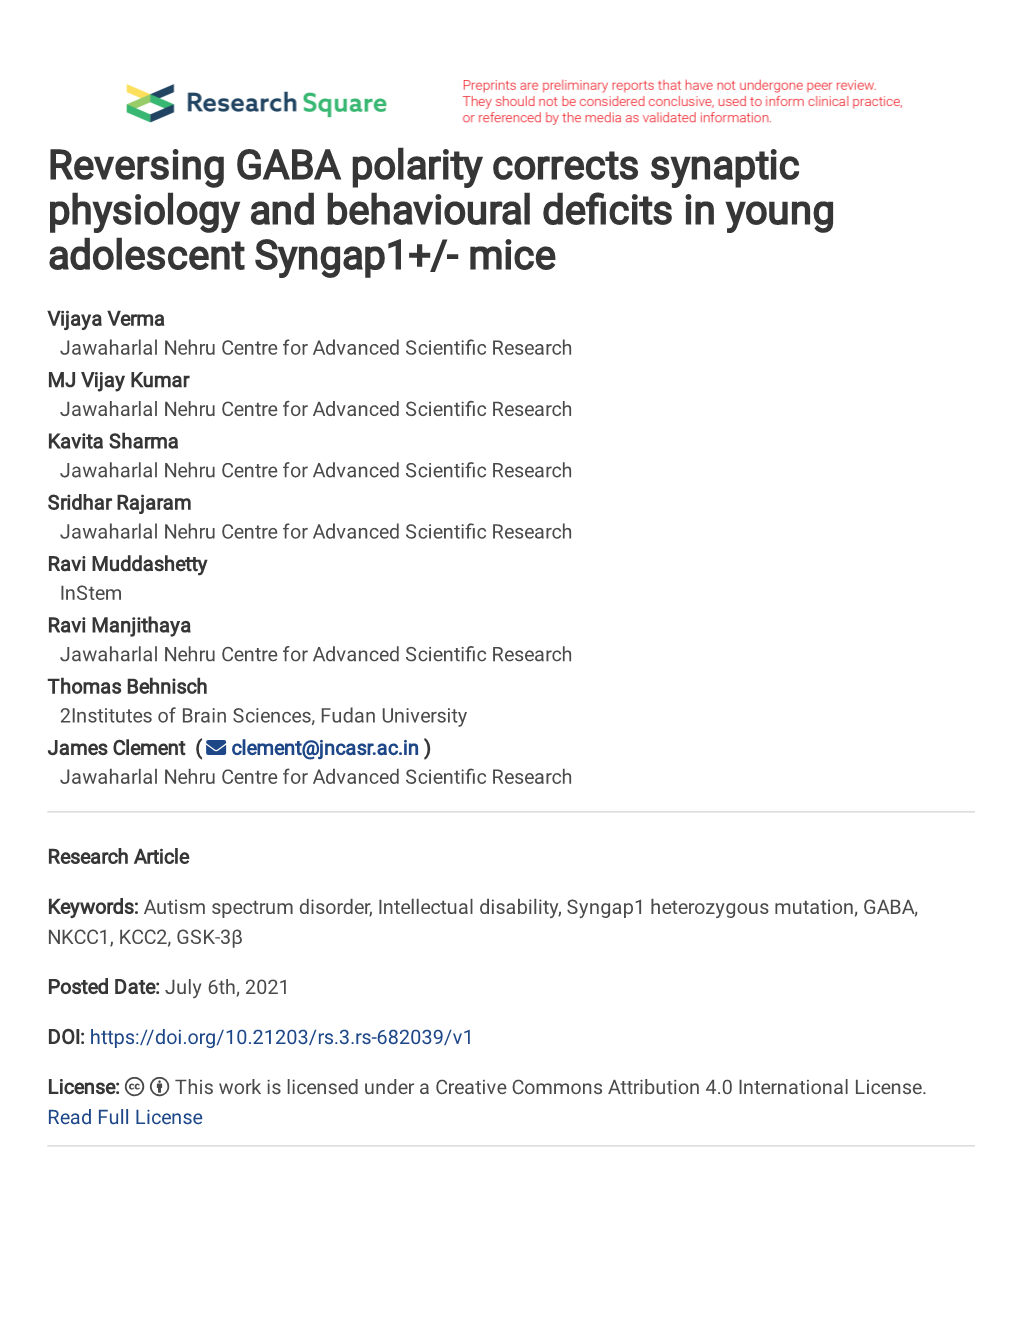 Reversing GABA Polarity Corrects Synaptic Physiology and Behavioural De�Cits in Young Adolescent Syngap1+/- Mice